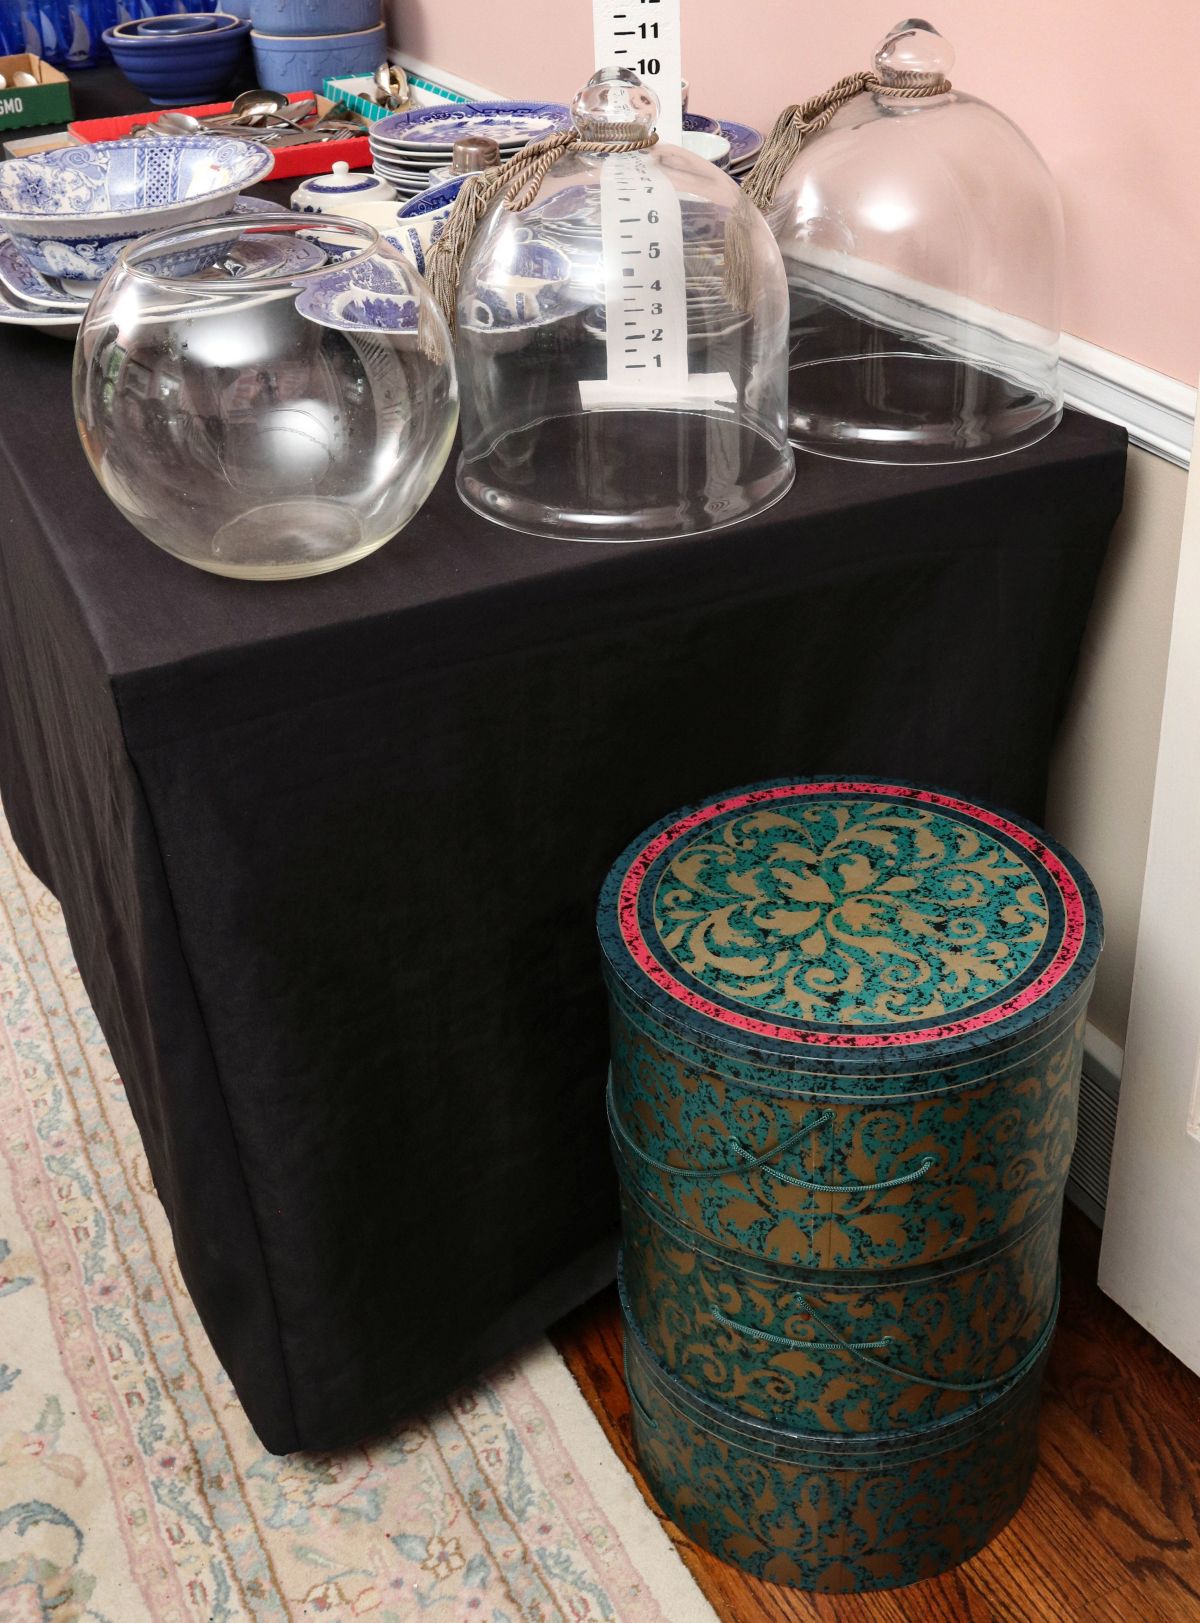 THREE HAT BOXES, TWO GLASS DOMES, GLASS FISH BOWL